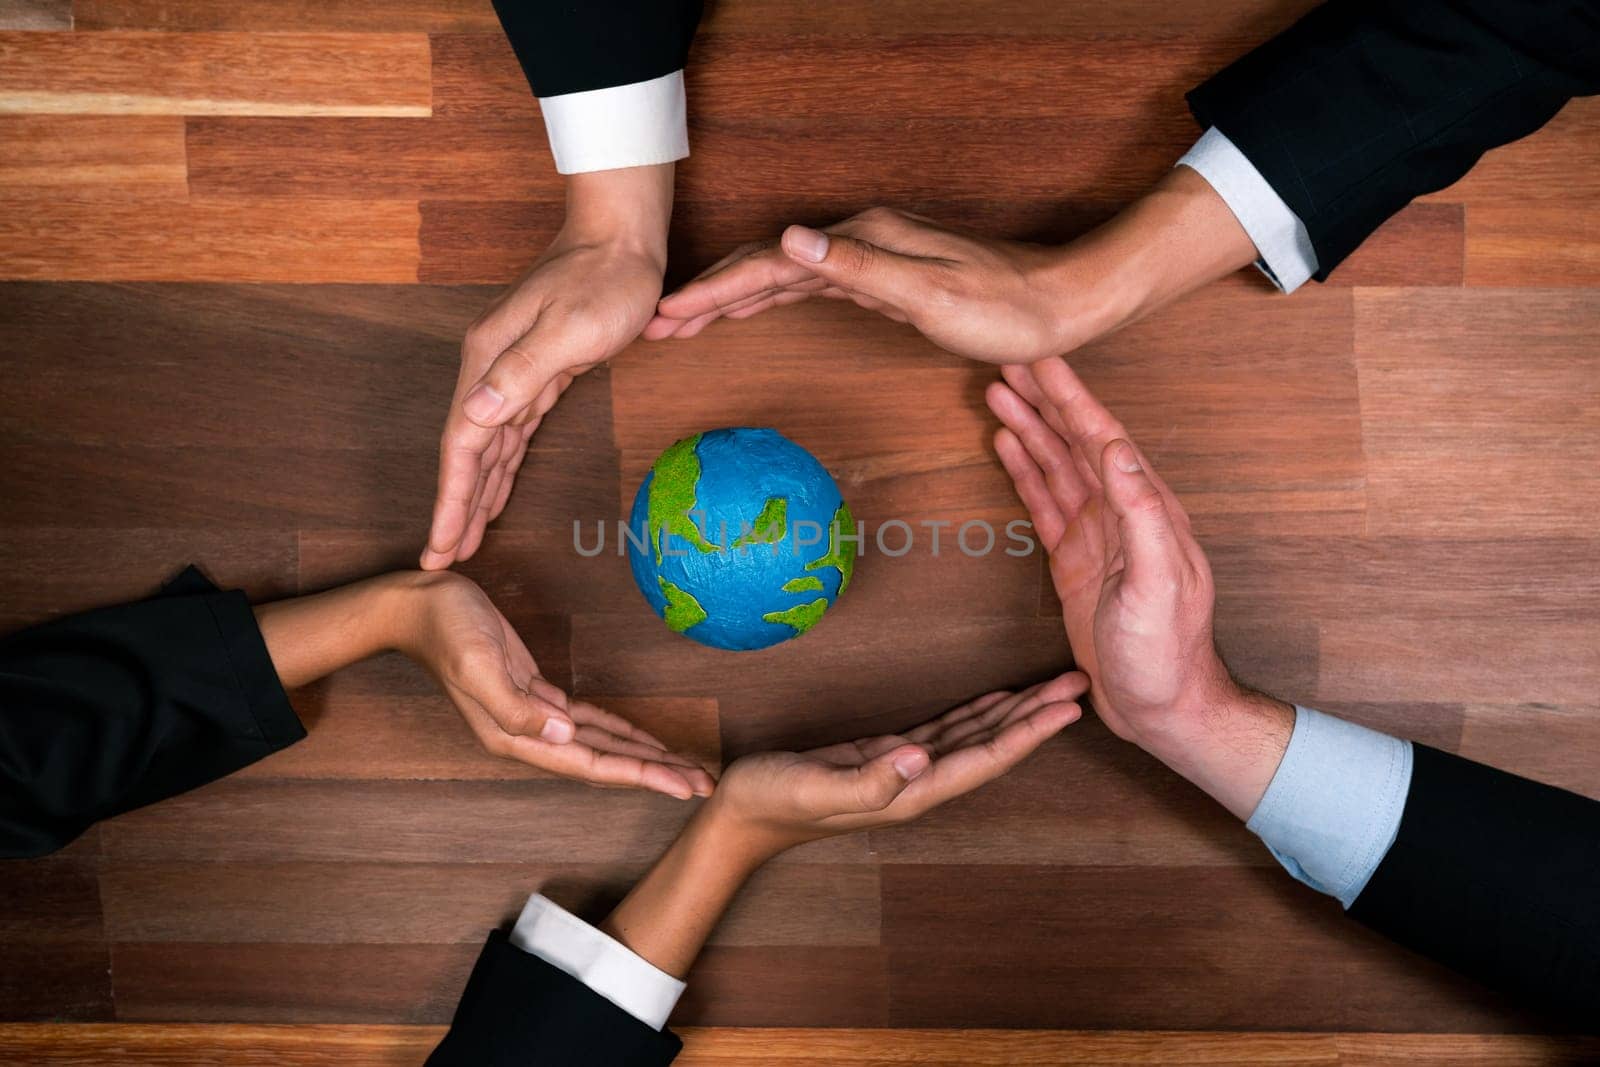 Top view business people holding Earth together in synergy as team building to utilize eco regulation for environmental protection by reducing CO2 emission to save Earth. Quaint